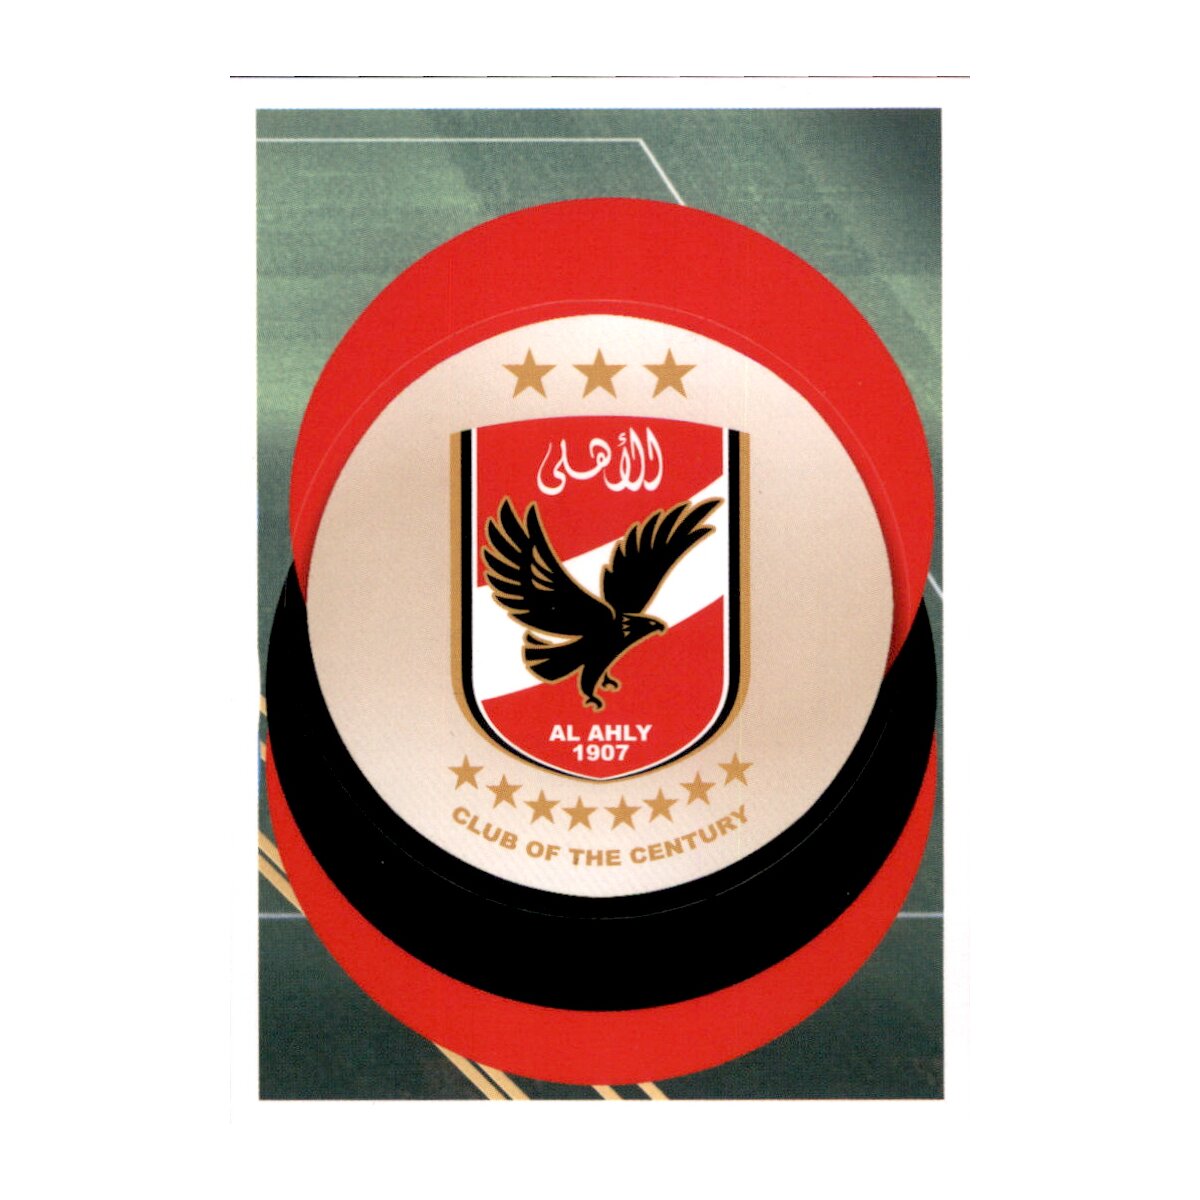 Ahly Logo - The Ninth Star Adorns Al Ahly S Logo After Restoring The